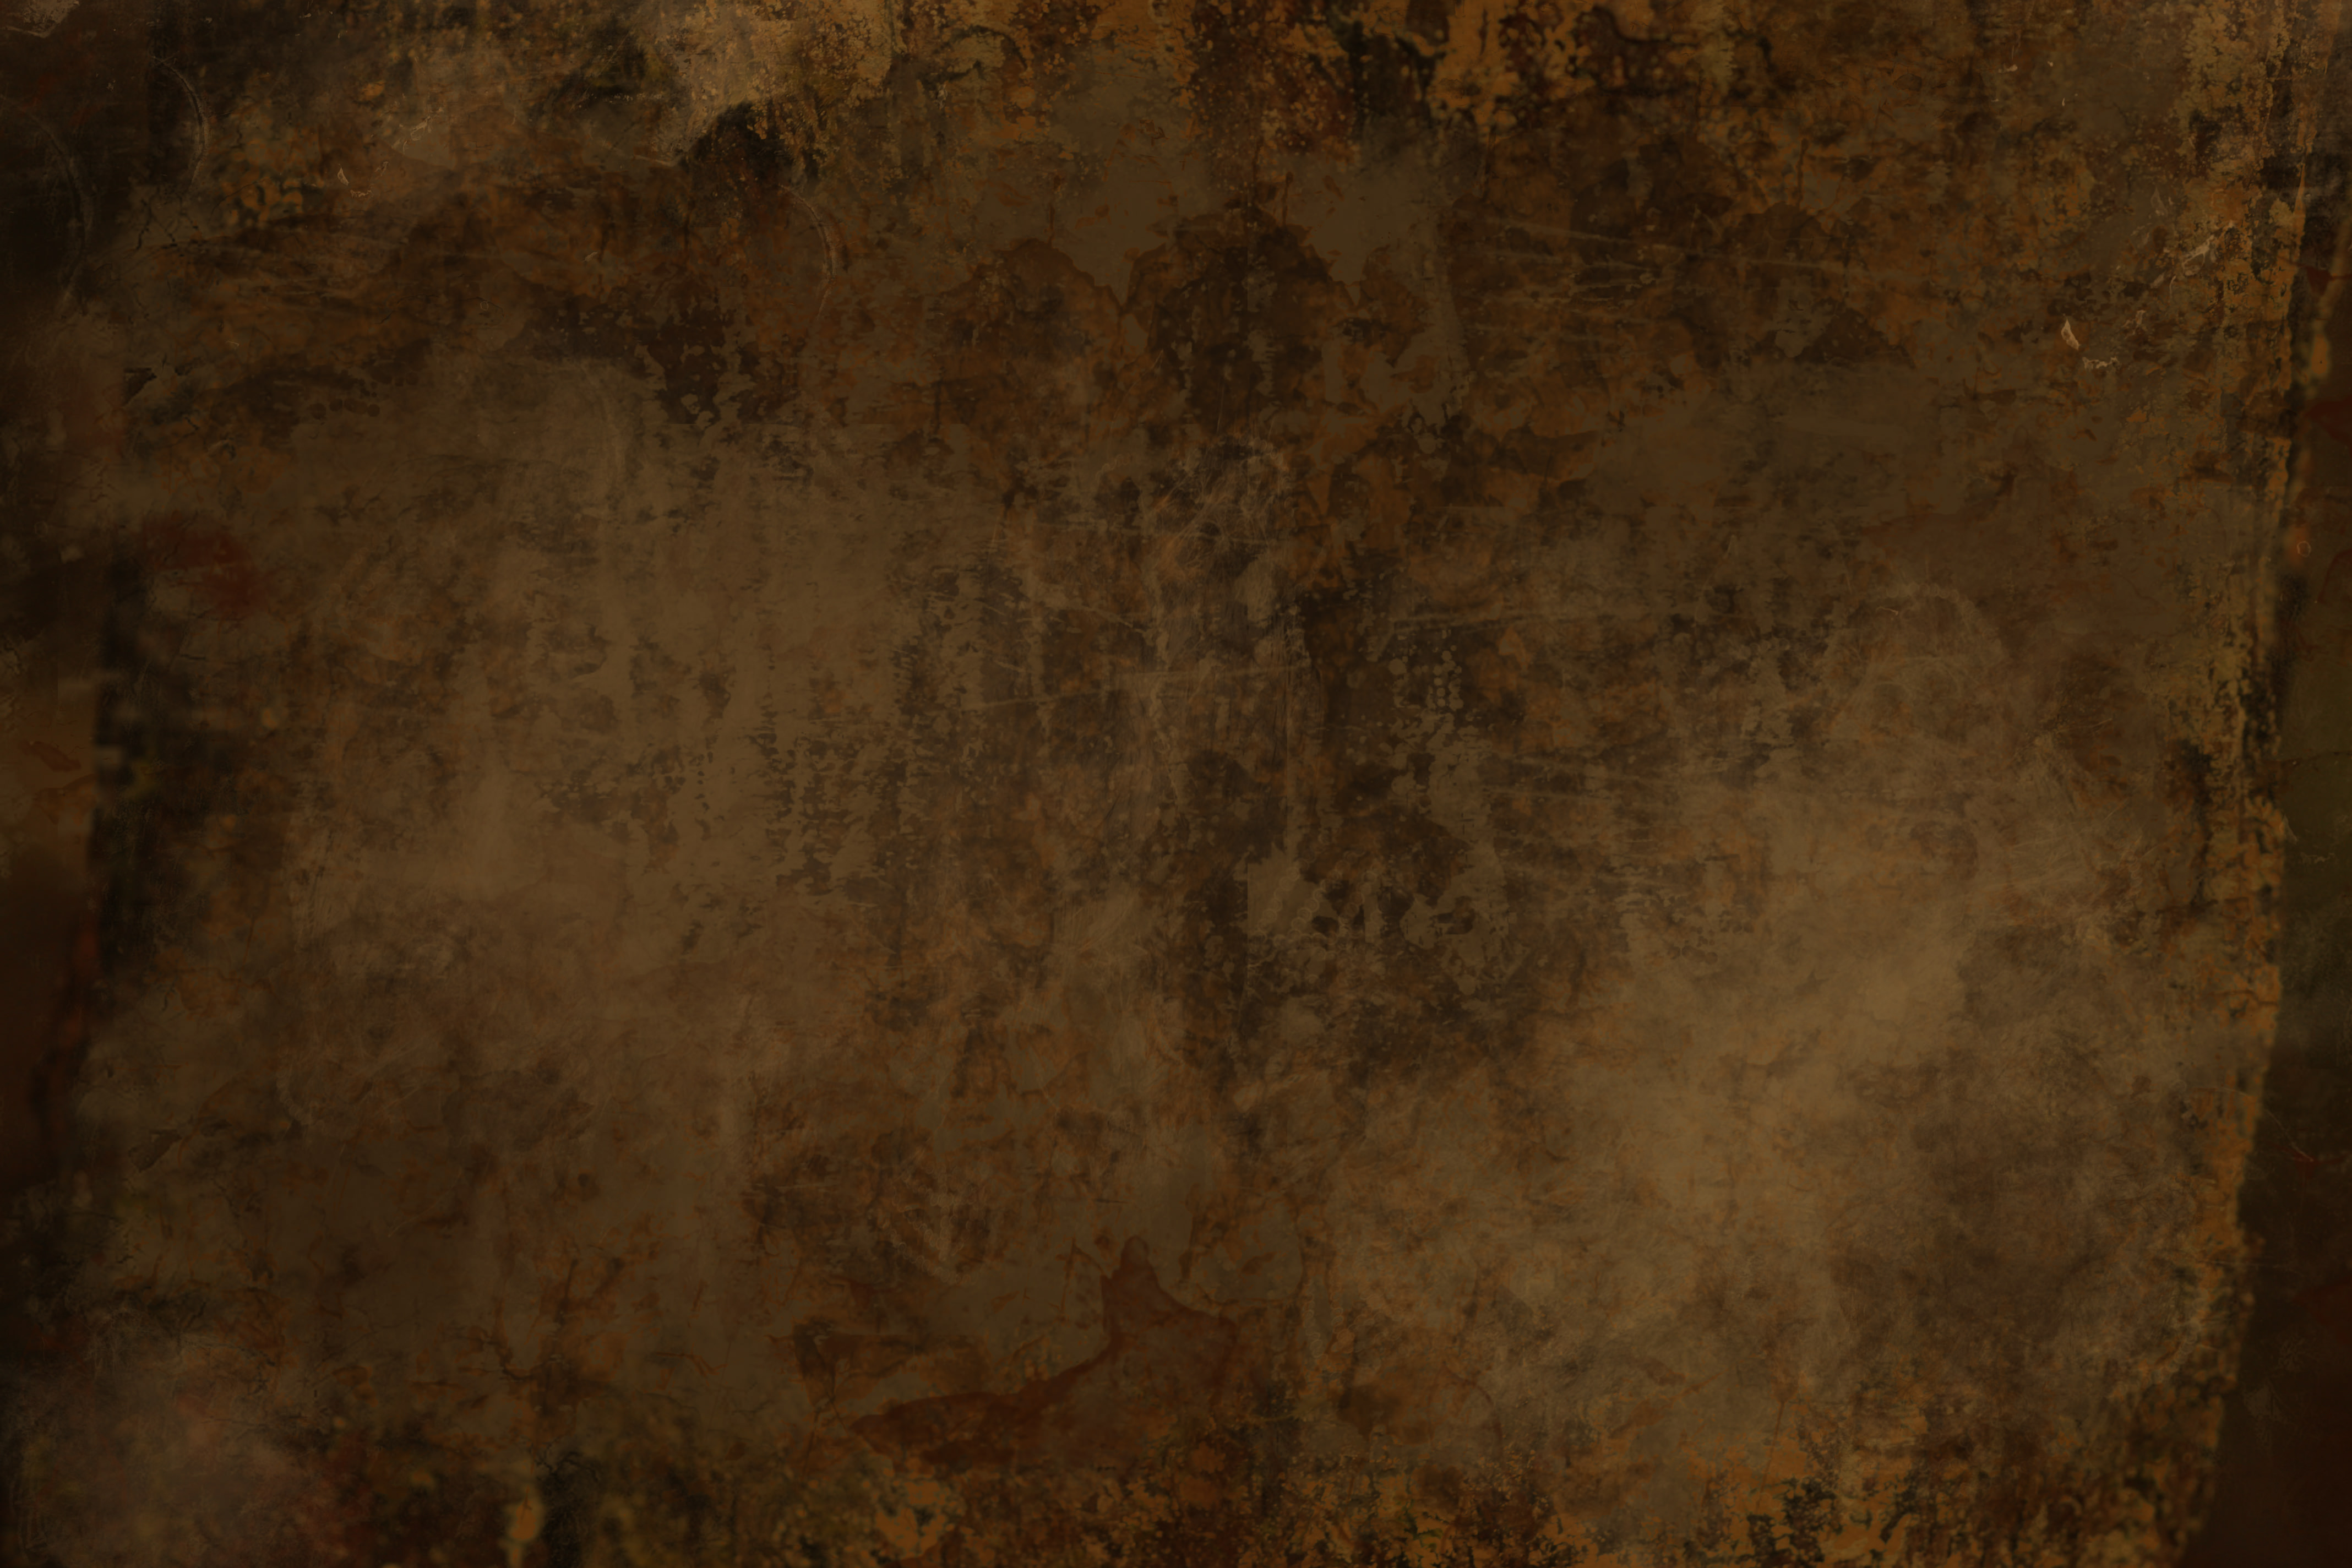 Grungy Brown Texture